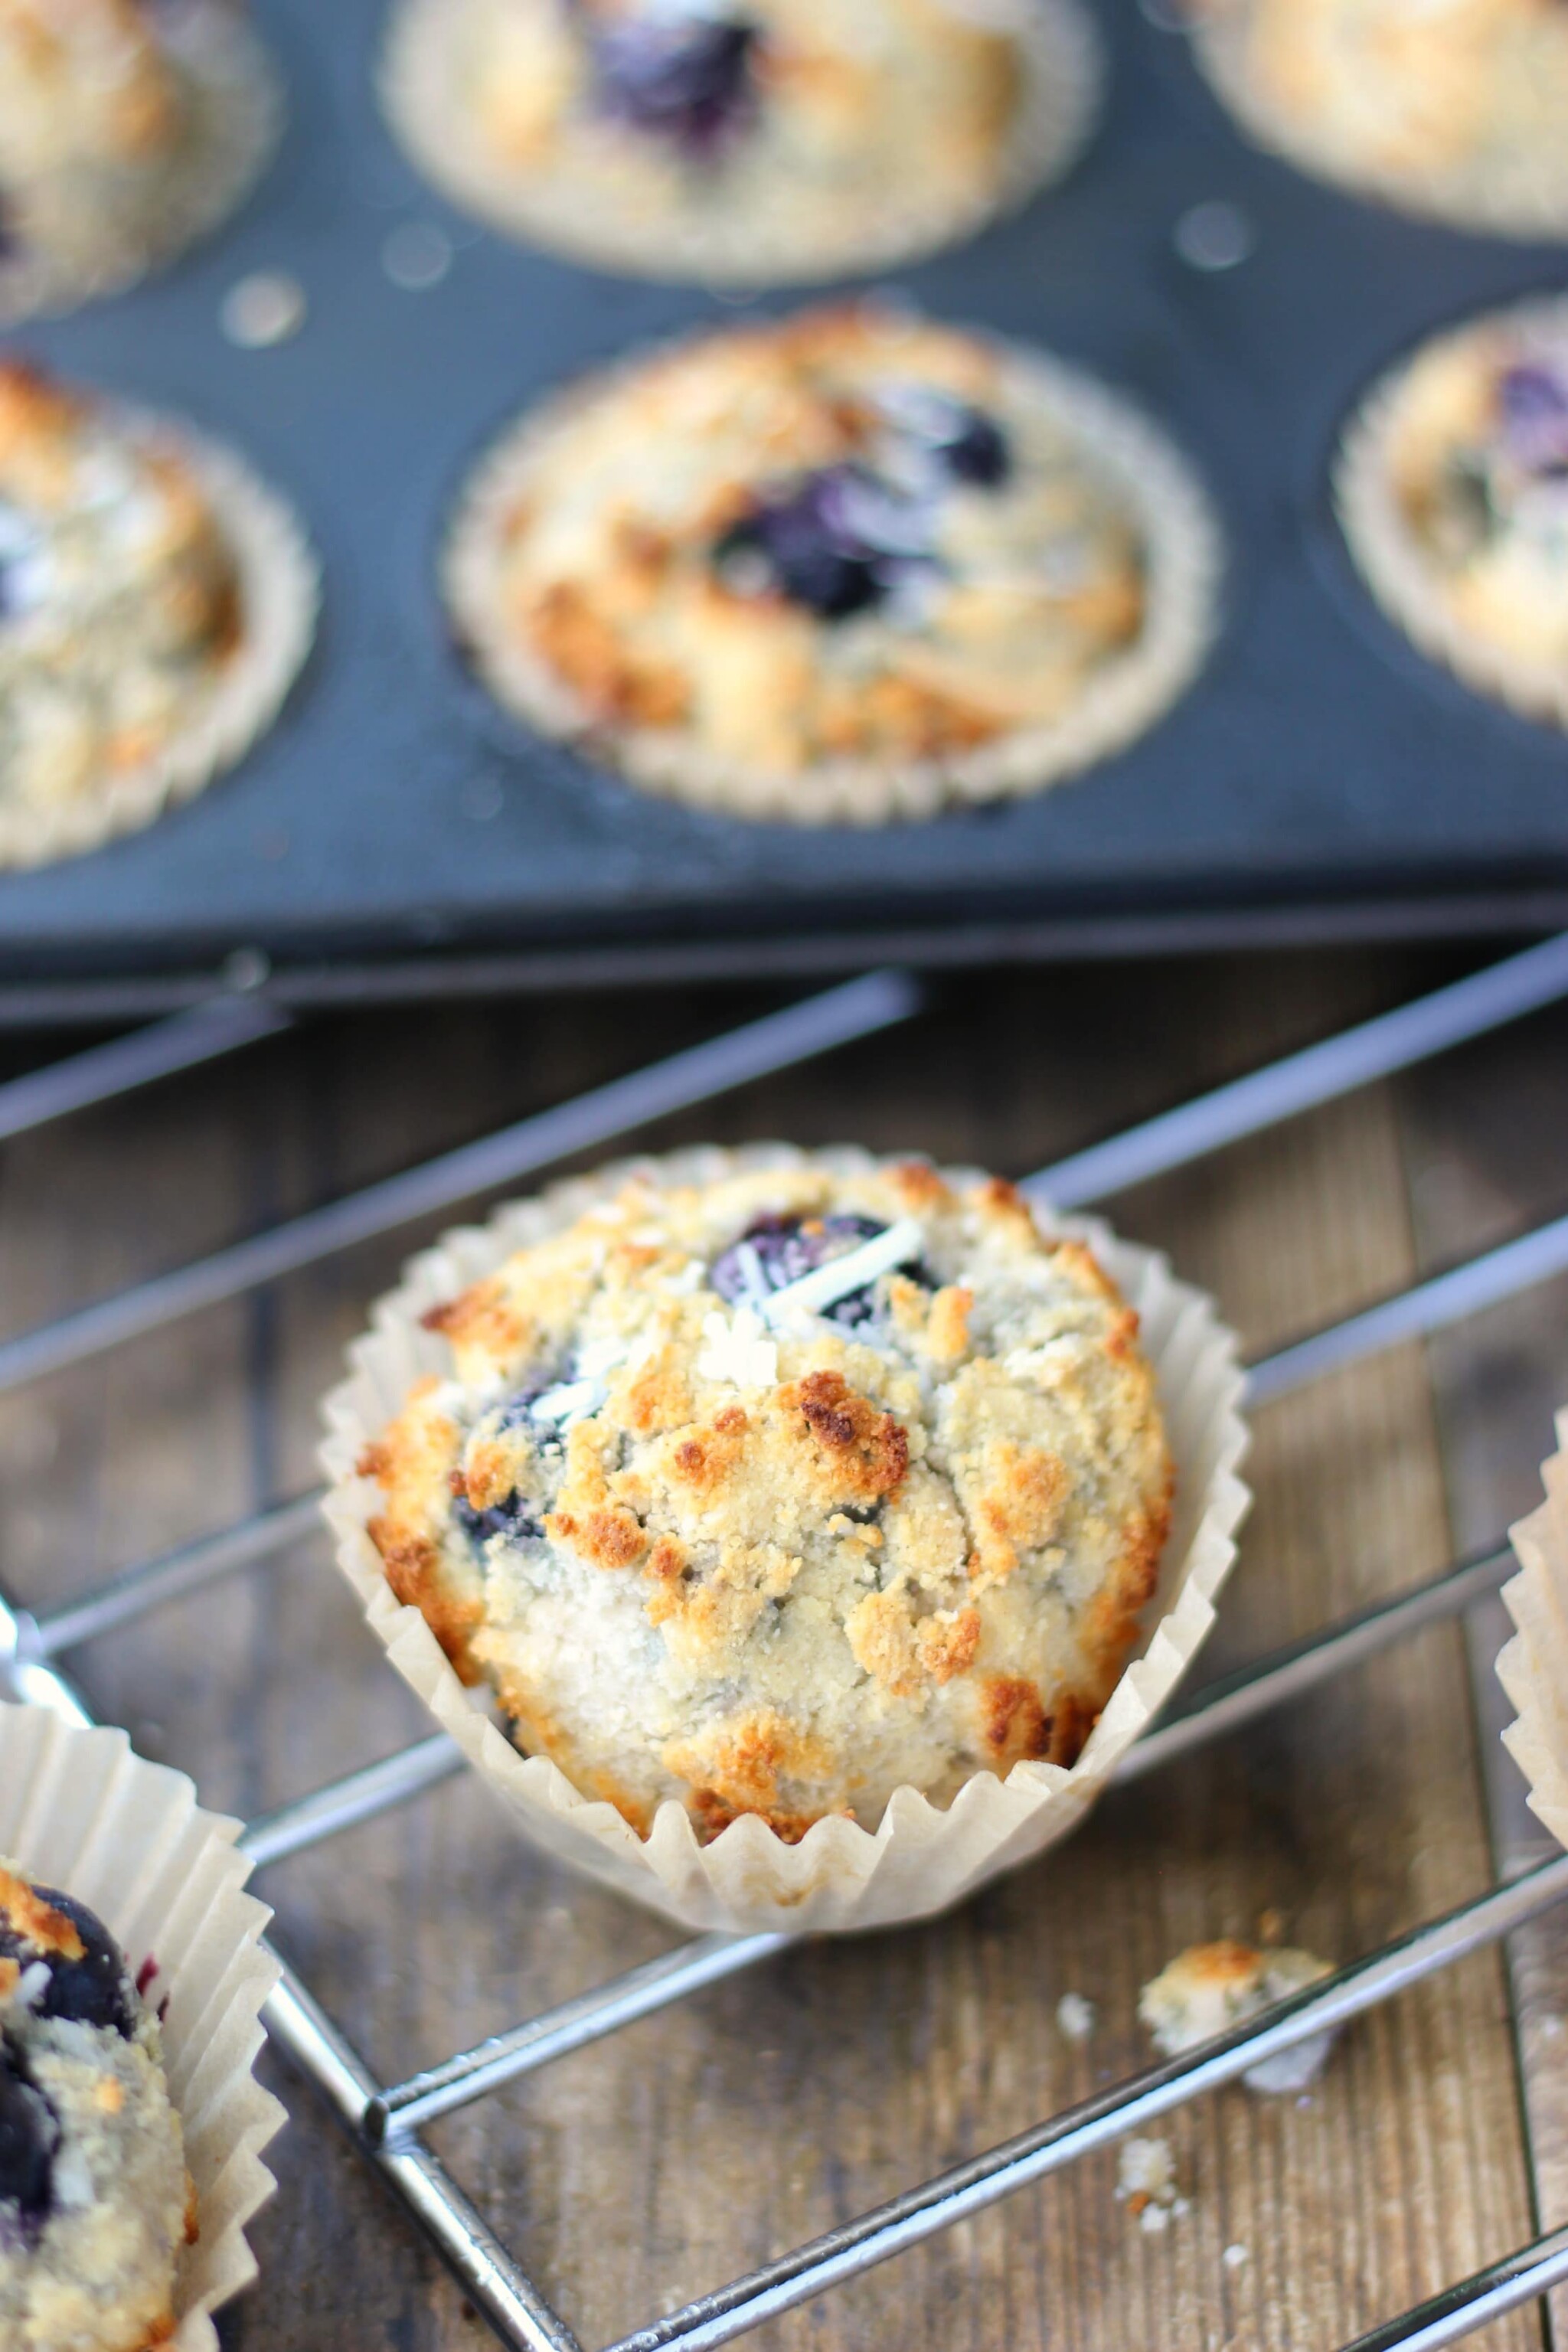 Now your morning experience just got a whole lot better with these delicious and quilt-free Coconut Blueberry Muffins. Enjoy!